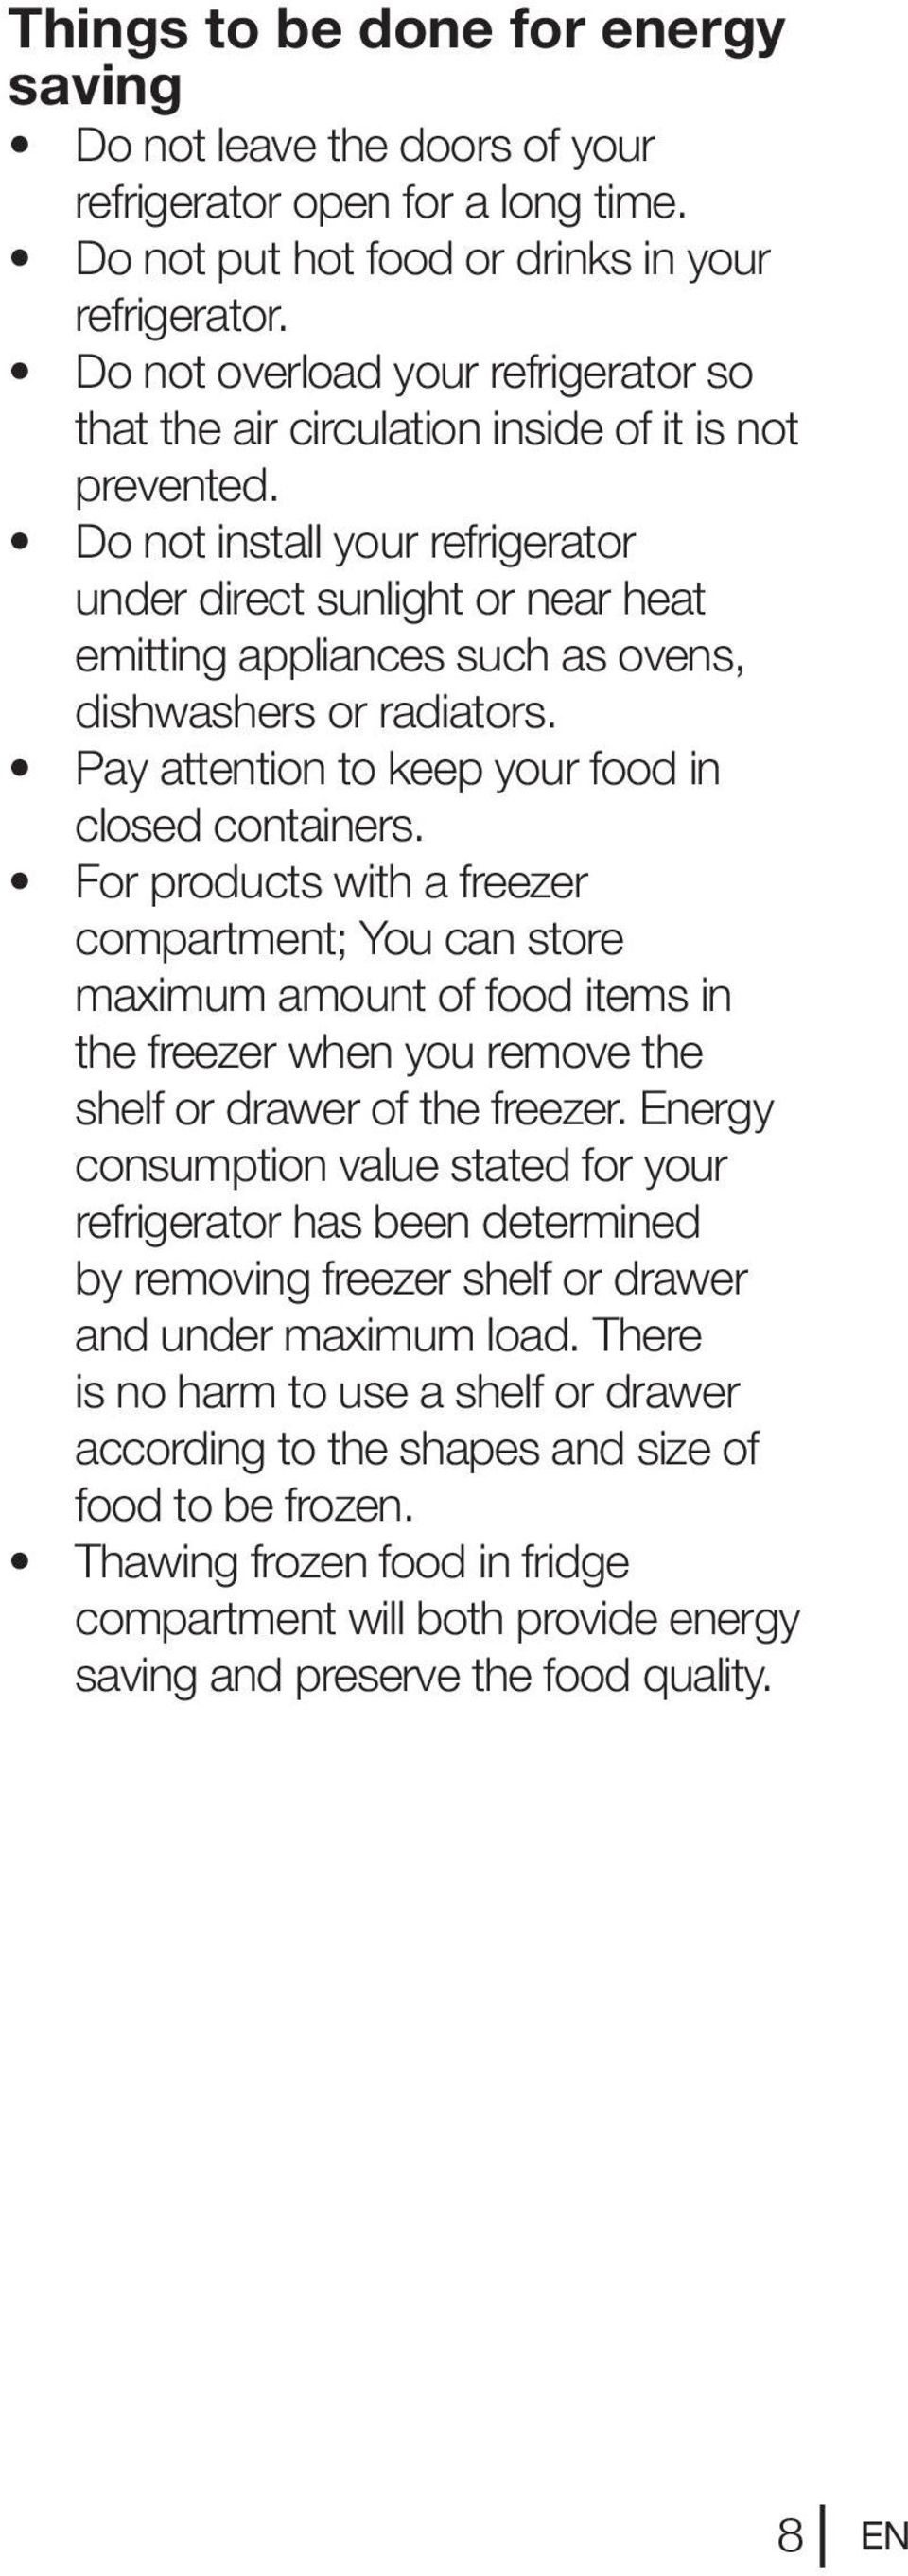 Do not install your refrigerator under direct sunlight or near heat emitting appliances such as ovens, dishwashers or radiators. Pay attention to keep your food in closed containers.